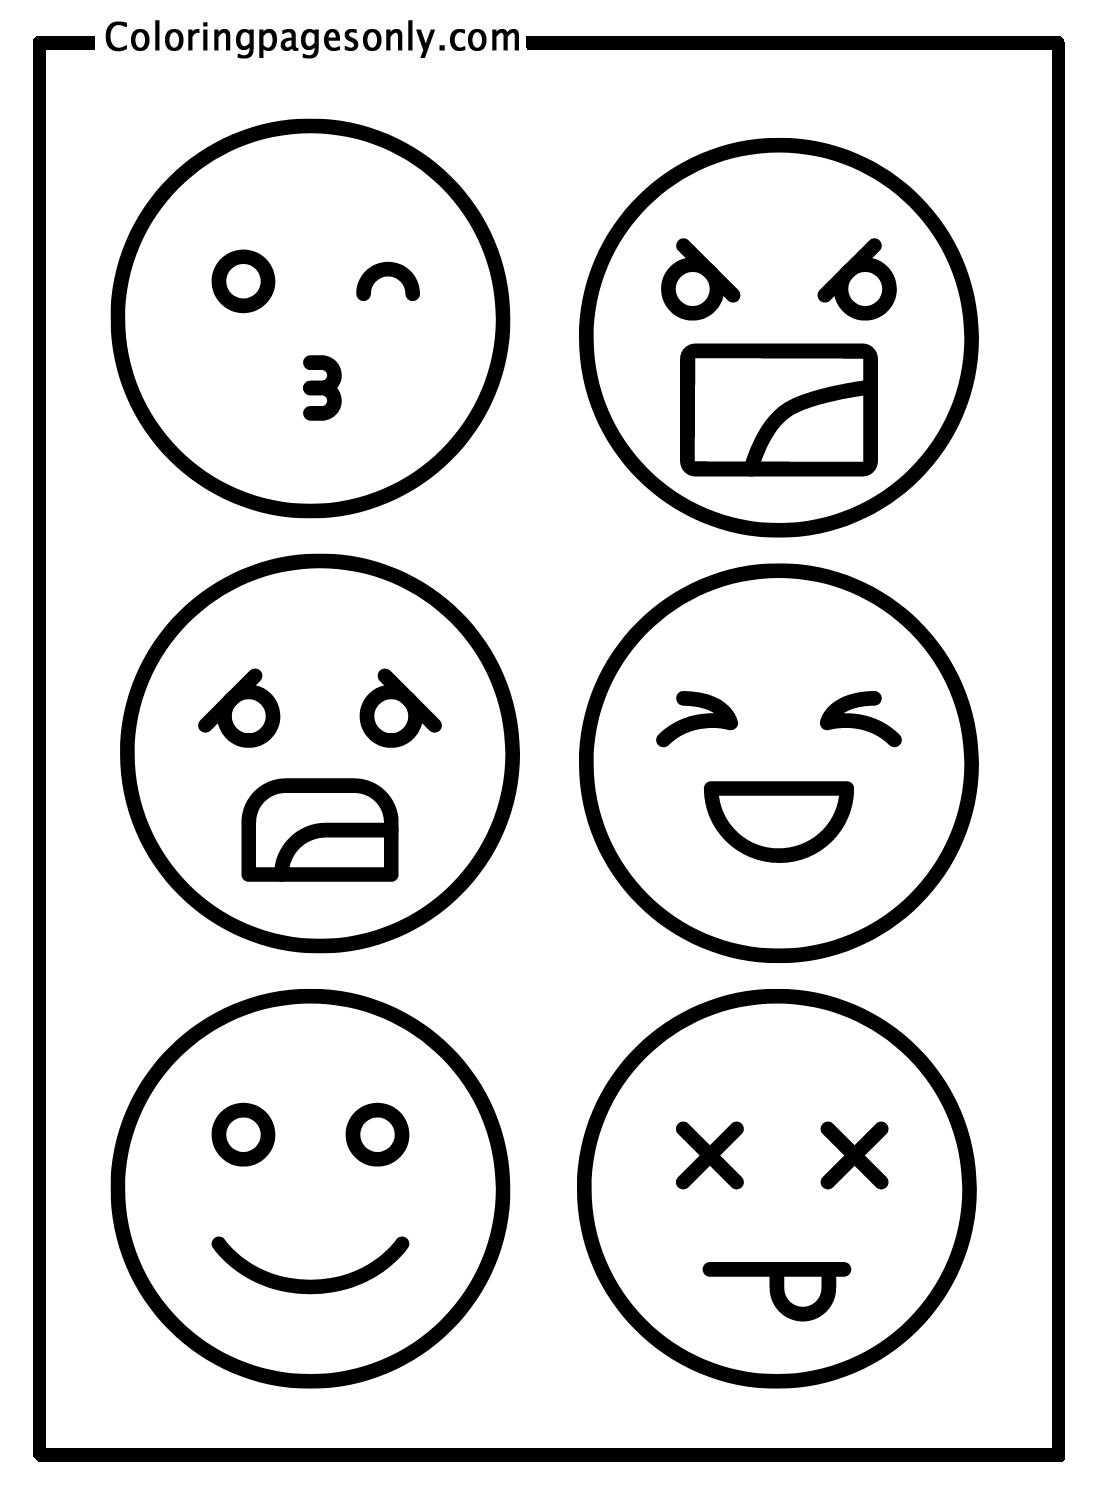 Printable Emotions Coloring Pages